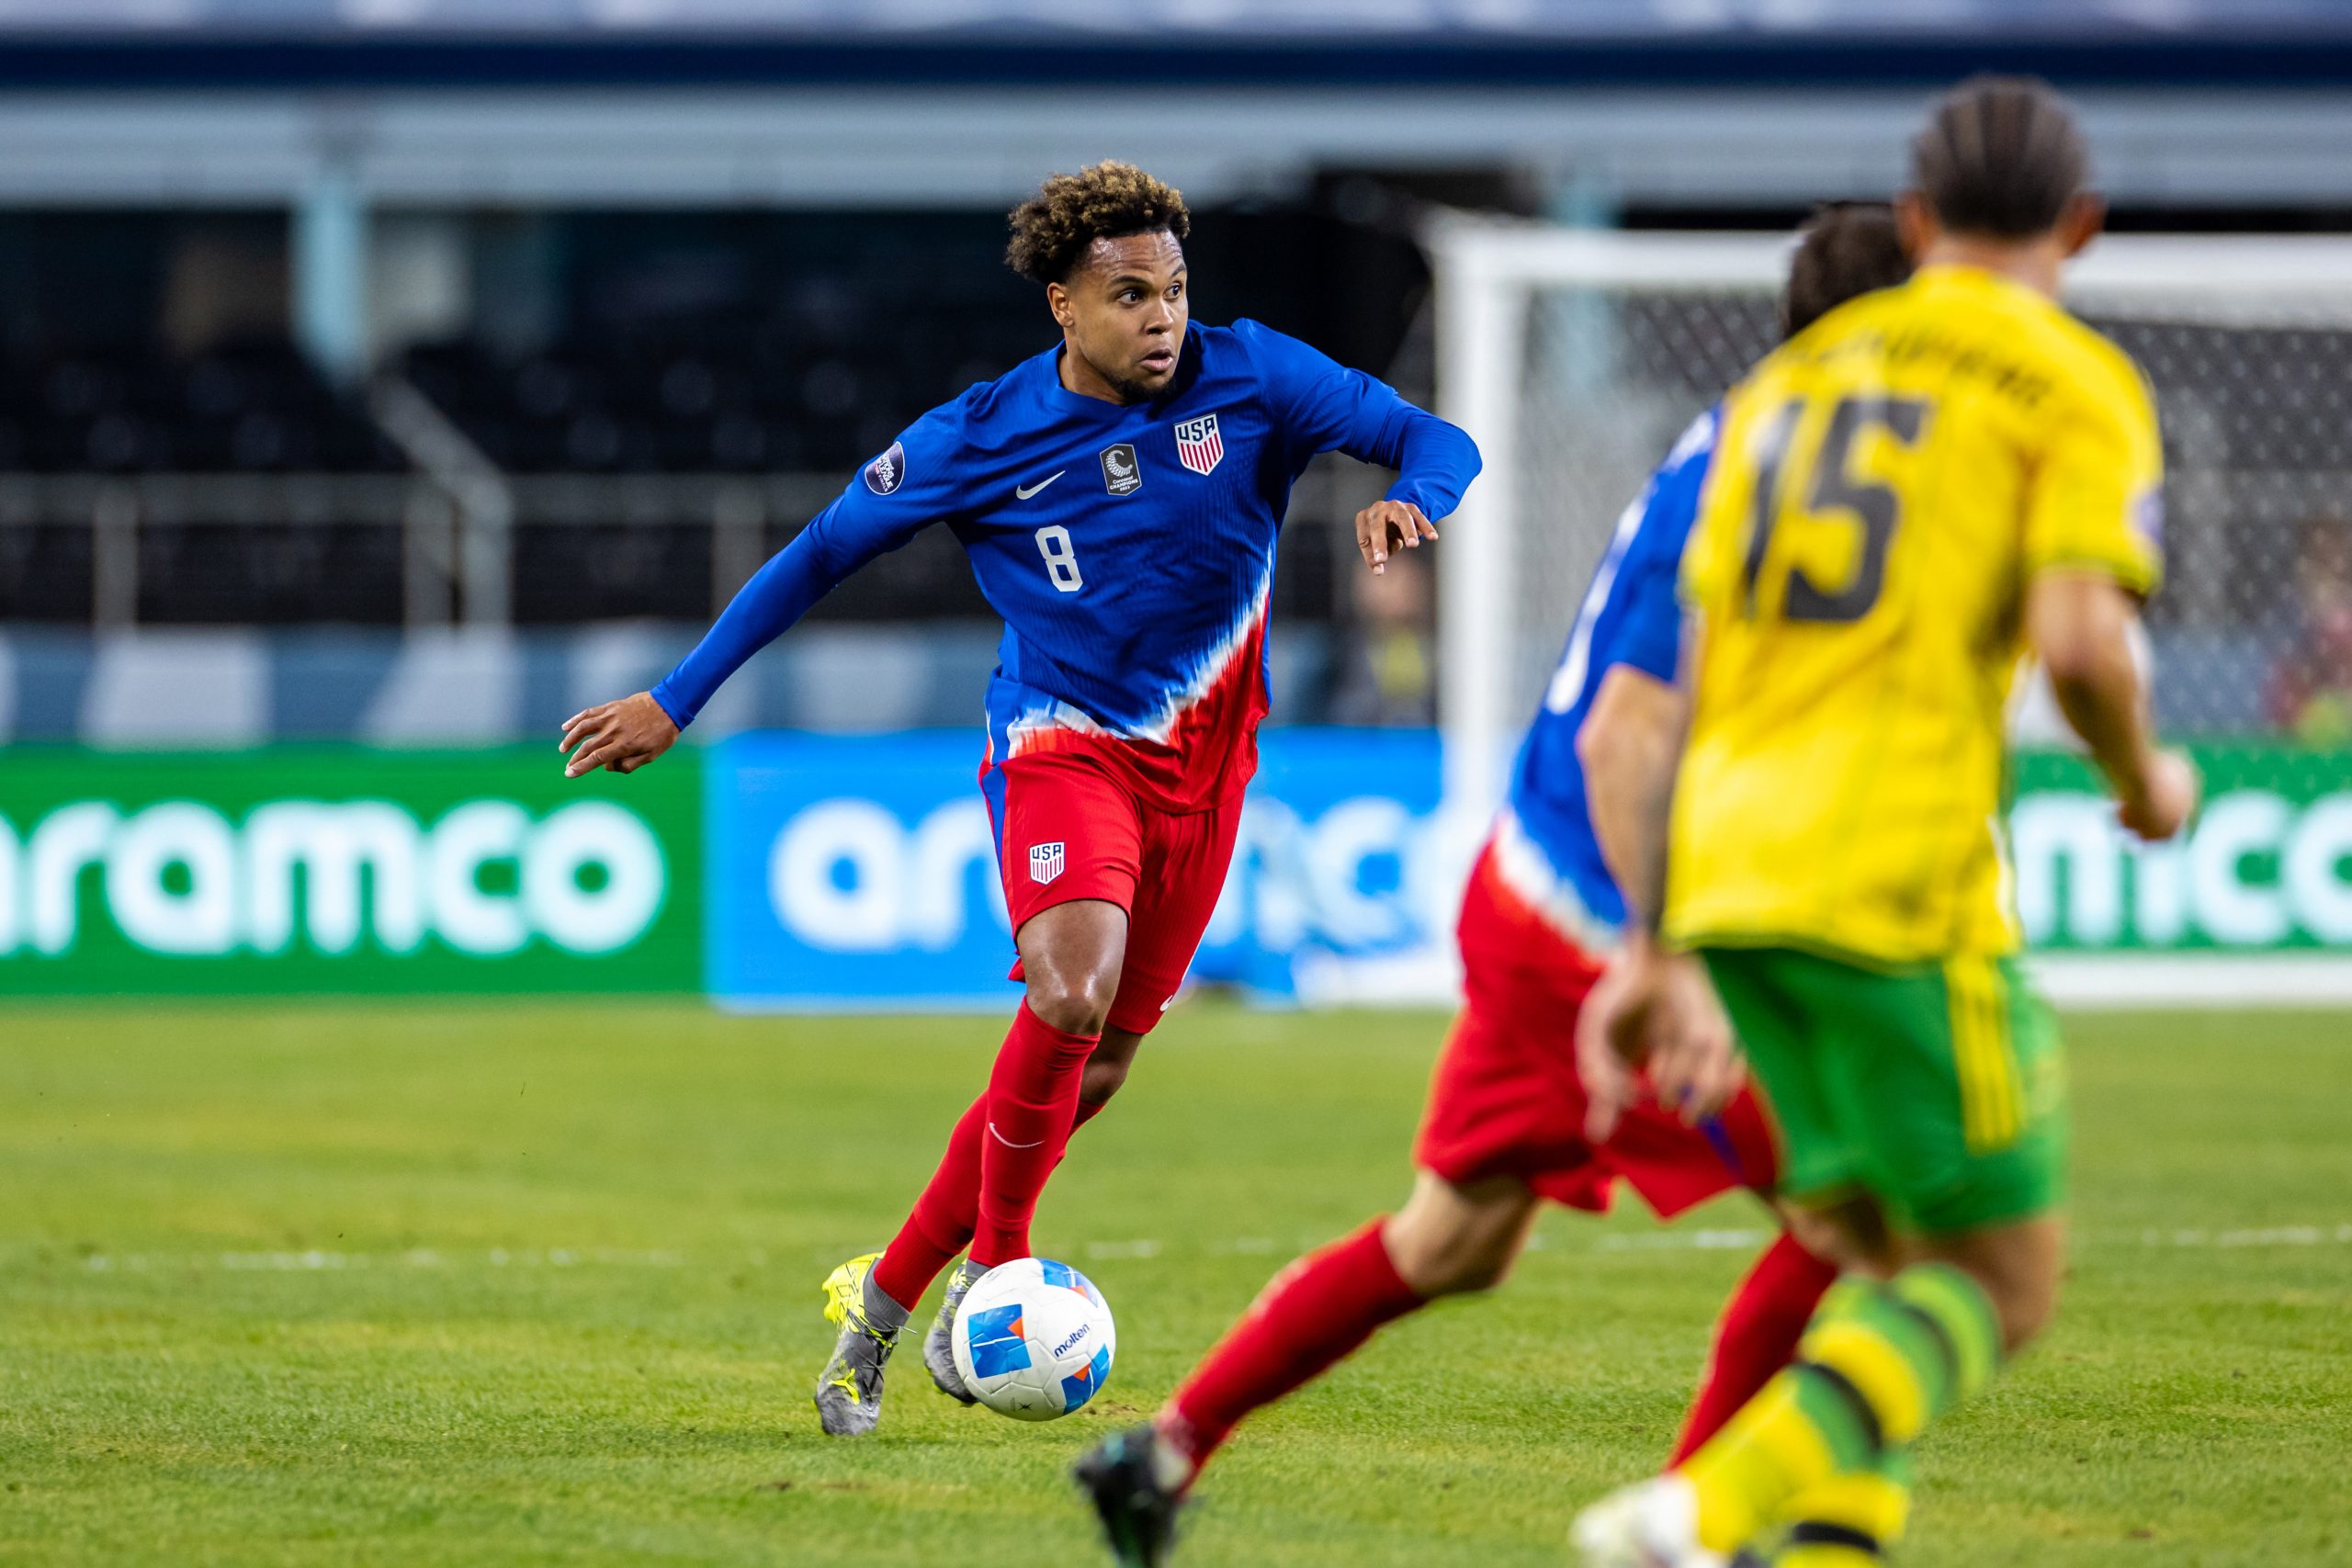 Weston McKennie keeps his eye on the opposition as the US Men's National team knocks off Jamaica 3-1 in the Concacaf Nations League on March 21, 2024, at AT&T Stadium in Arlington, Texas. (Matt Visinsky, 3rd Degree)